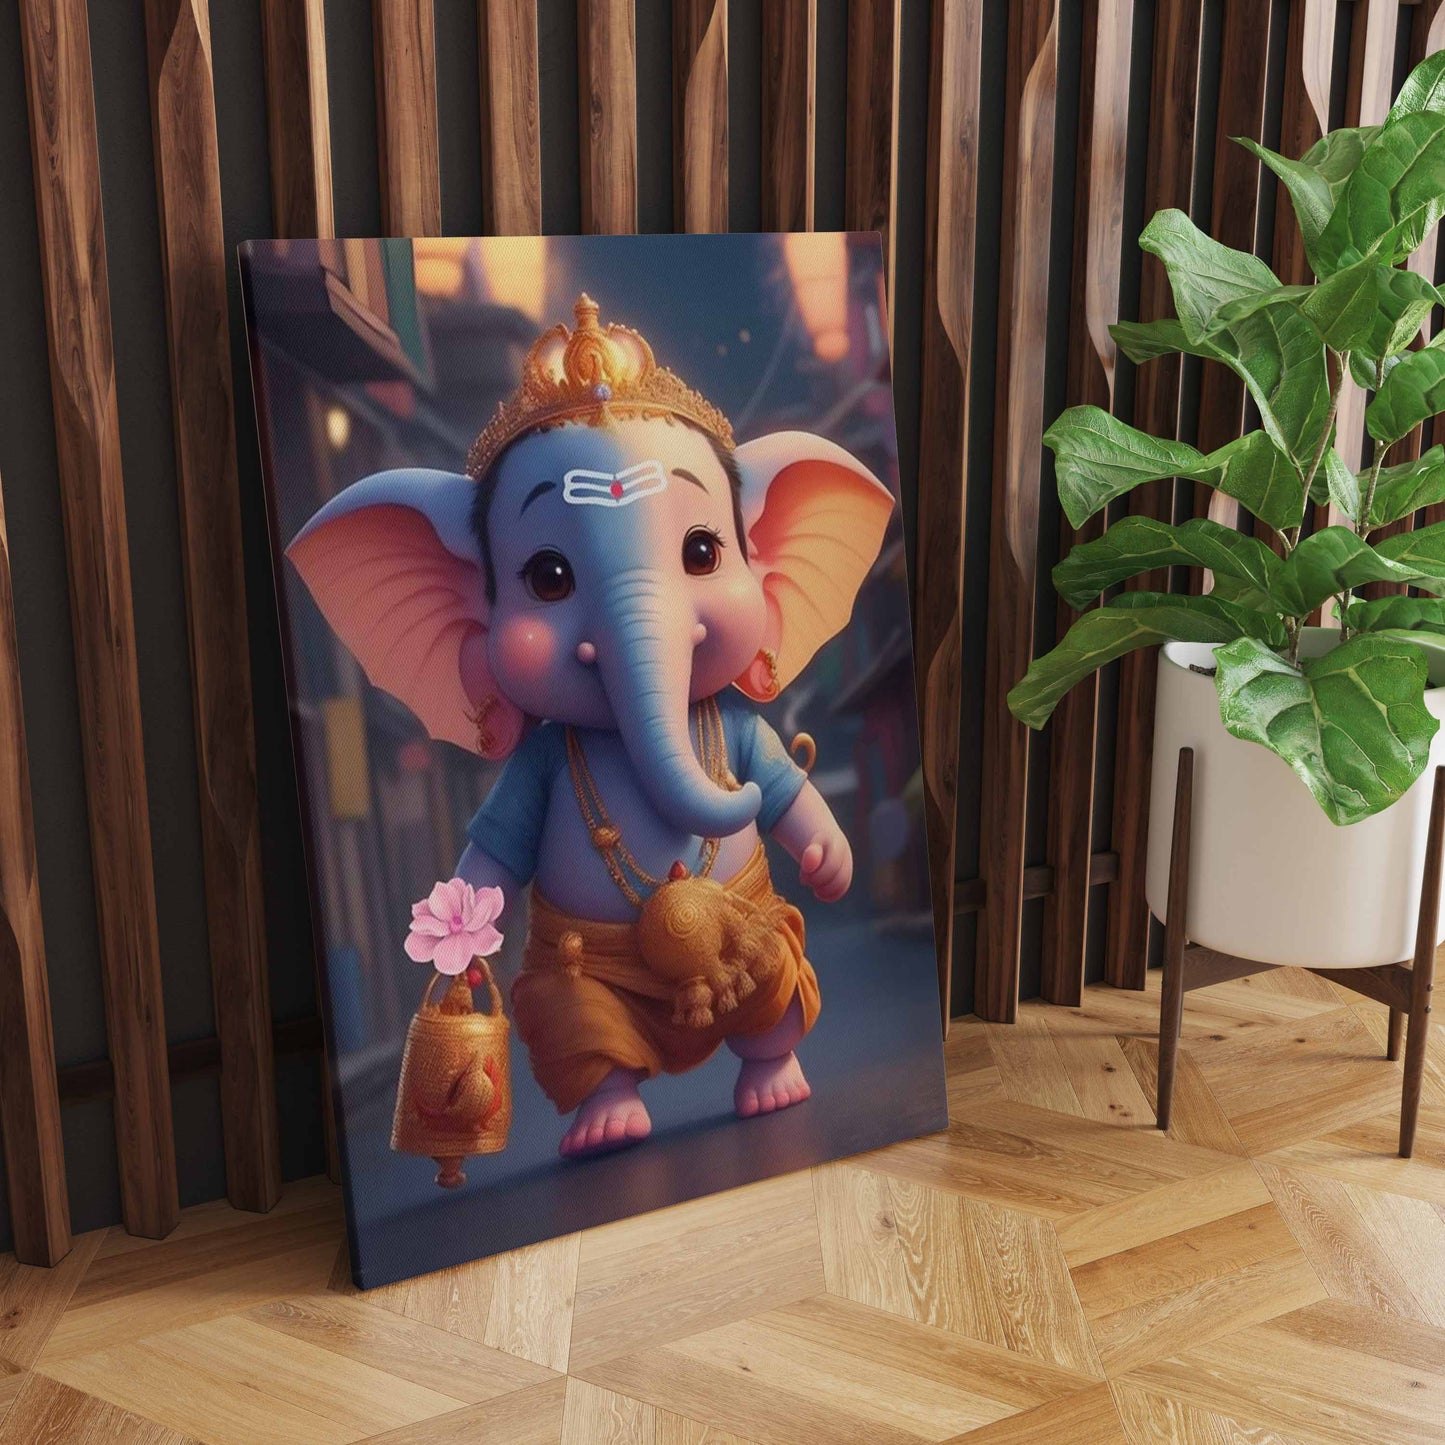 Celestial Stroll: A Wall Art Capturing Cute Ganesh Walking on the Road - Embrace the Playful Spirit of the Divine - S05E58